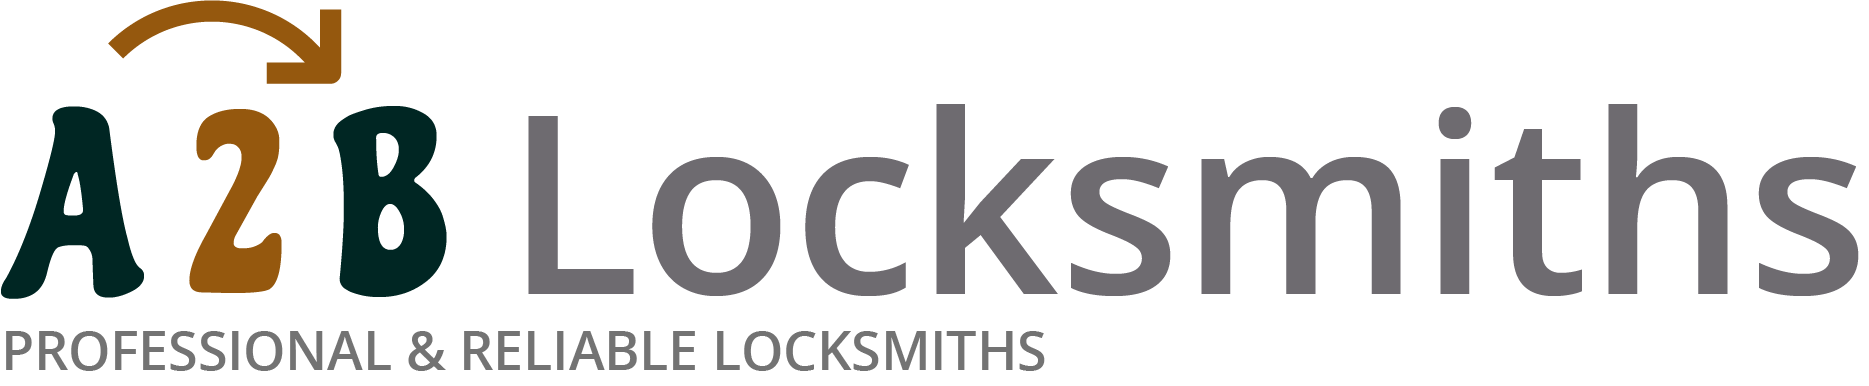 If you are locked out of house in Lewisham, our 24/7 local emergency locksmith services can help you.